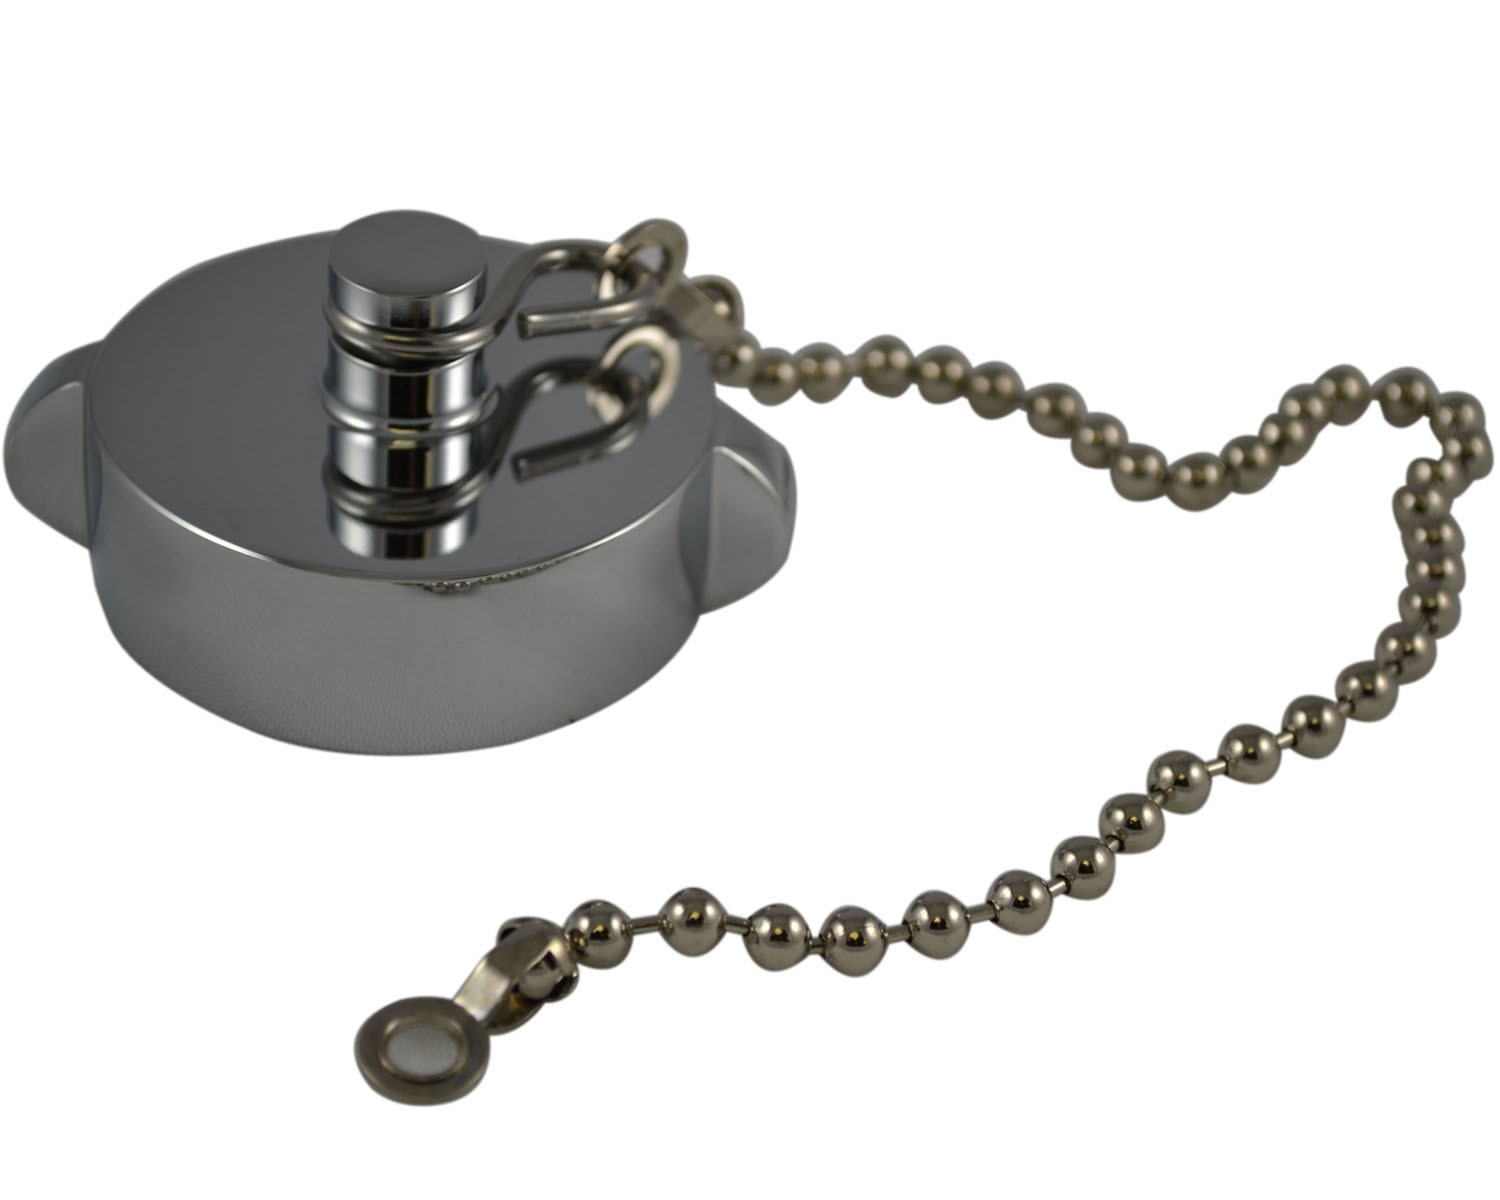 HCC28, 1.5 Customer Thread Female Cap Brass Chrome Plated with Chain, Rockerlug Tested to 500 psi